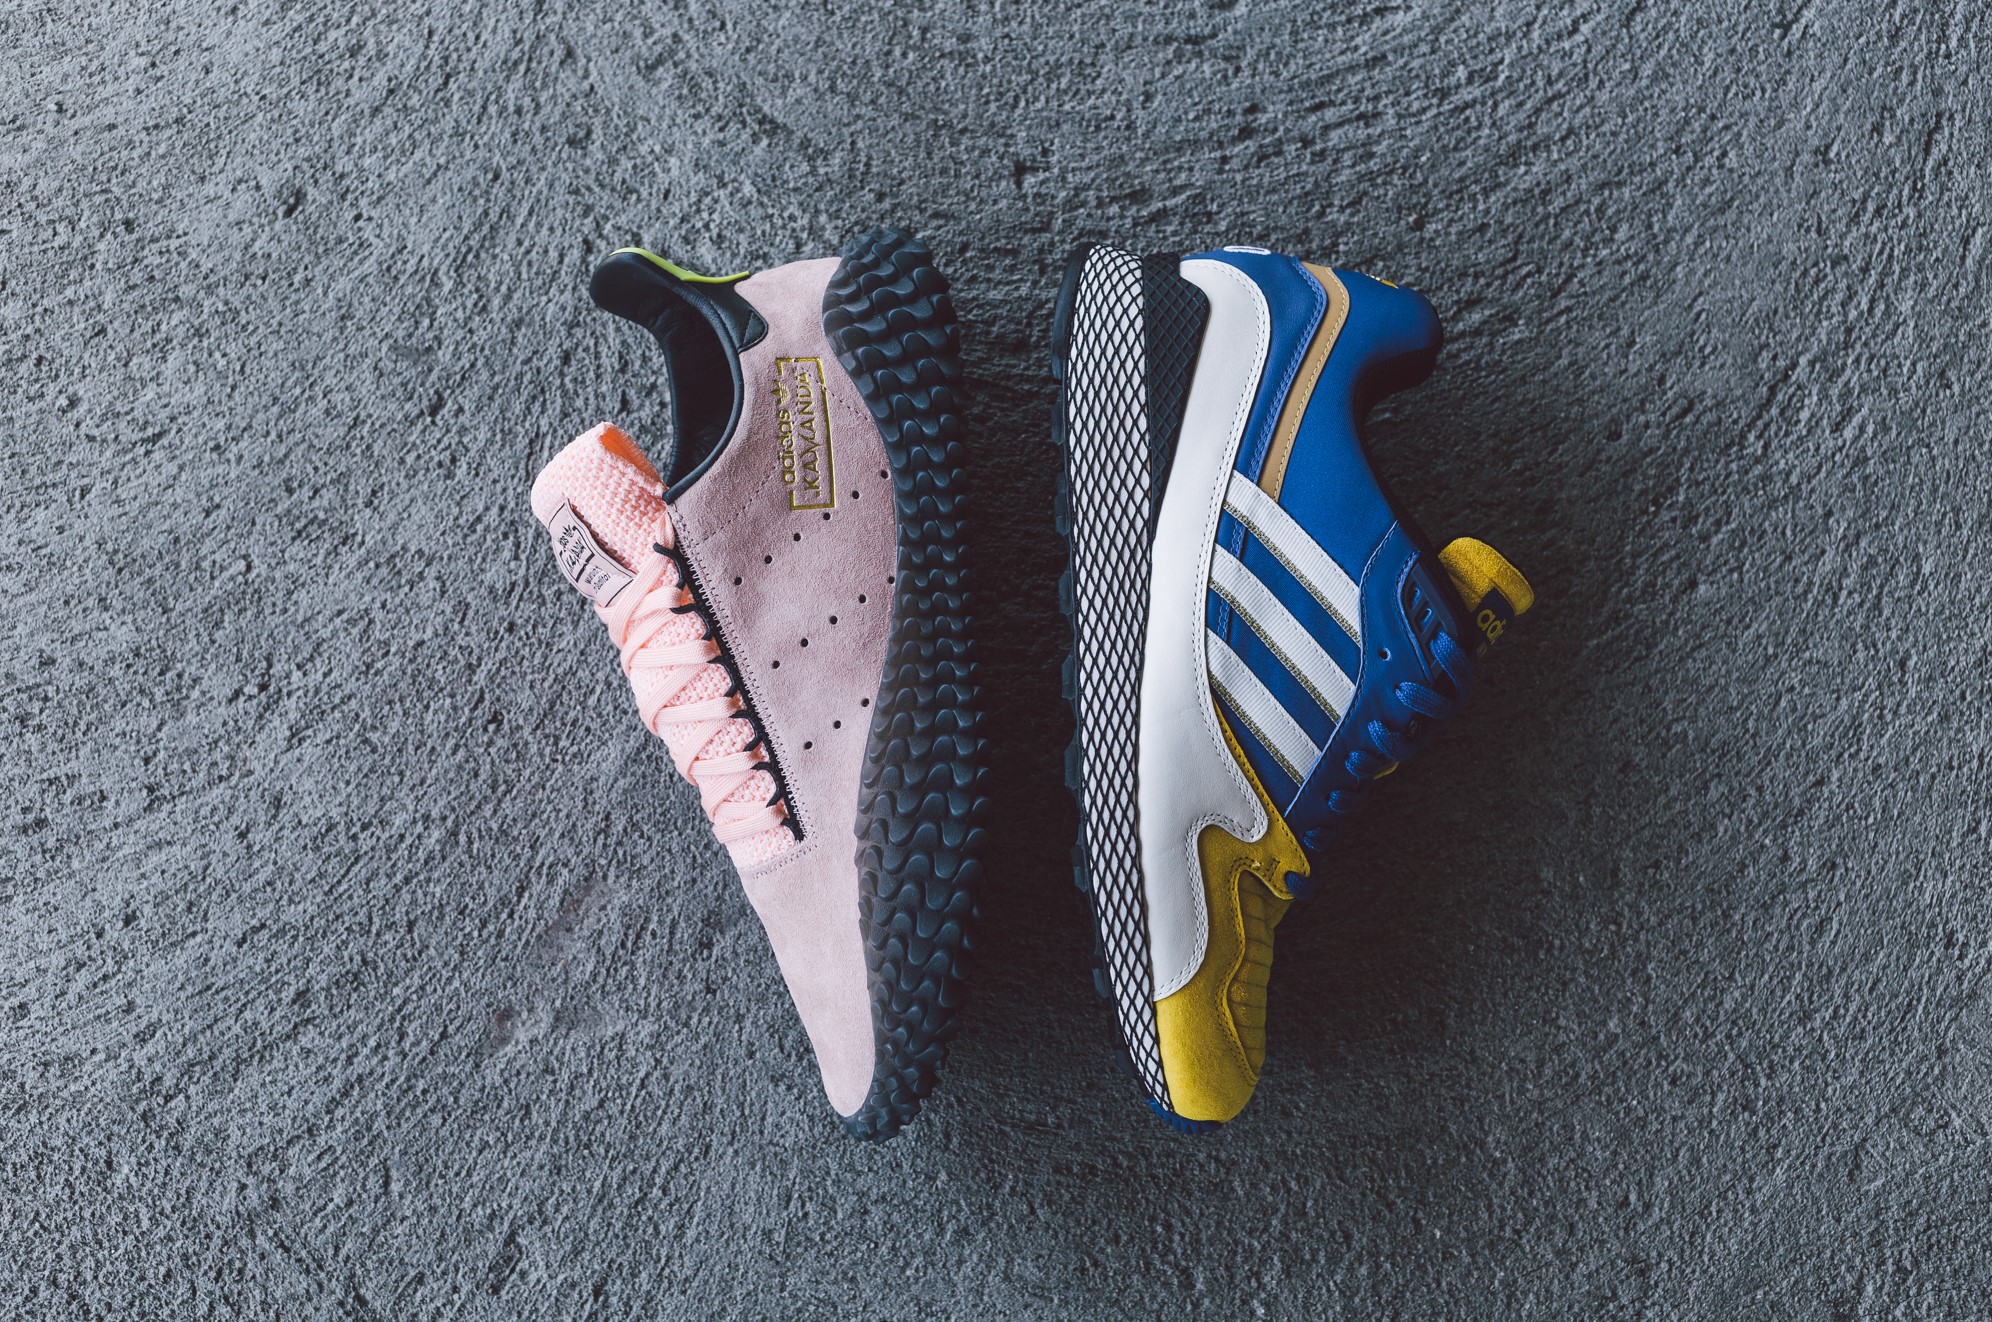 Detailed Look at the Entire 'Dragon Ball Z' adidas Sneaker Collection -  WearTesters